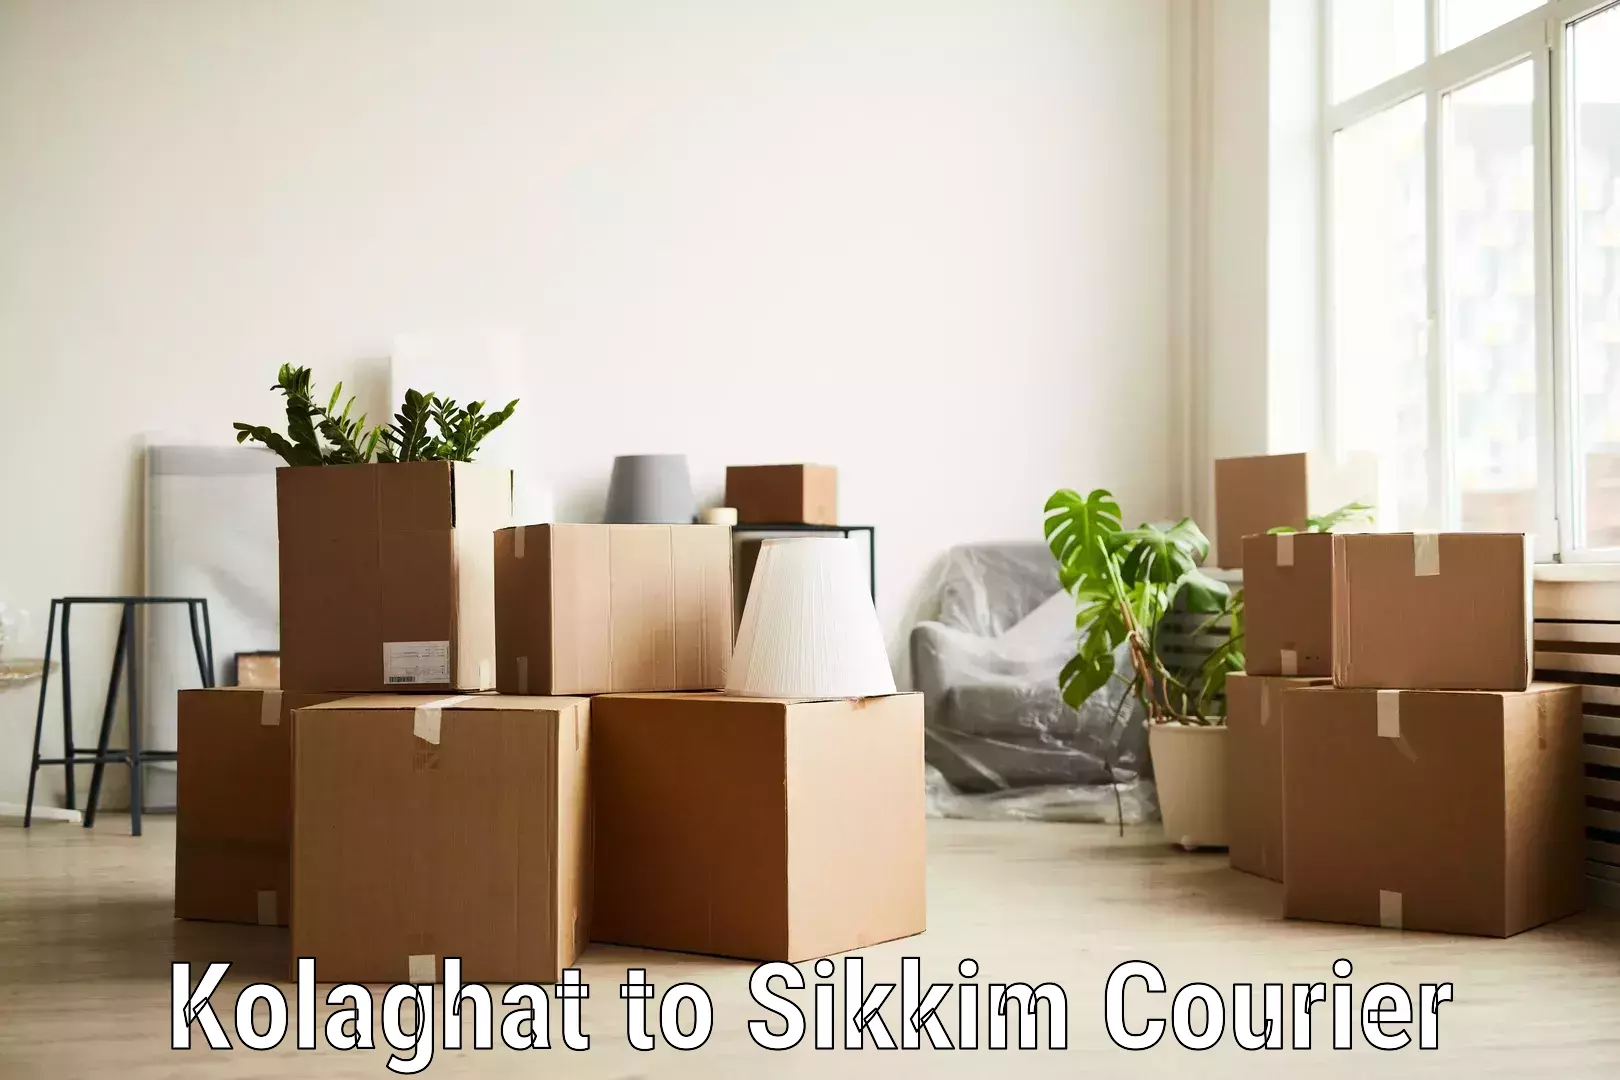 Customer-centric shipping Kolaghat to East Sikkim